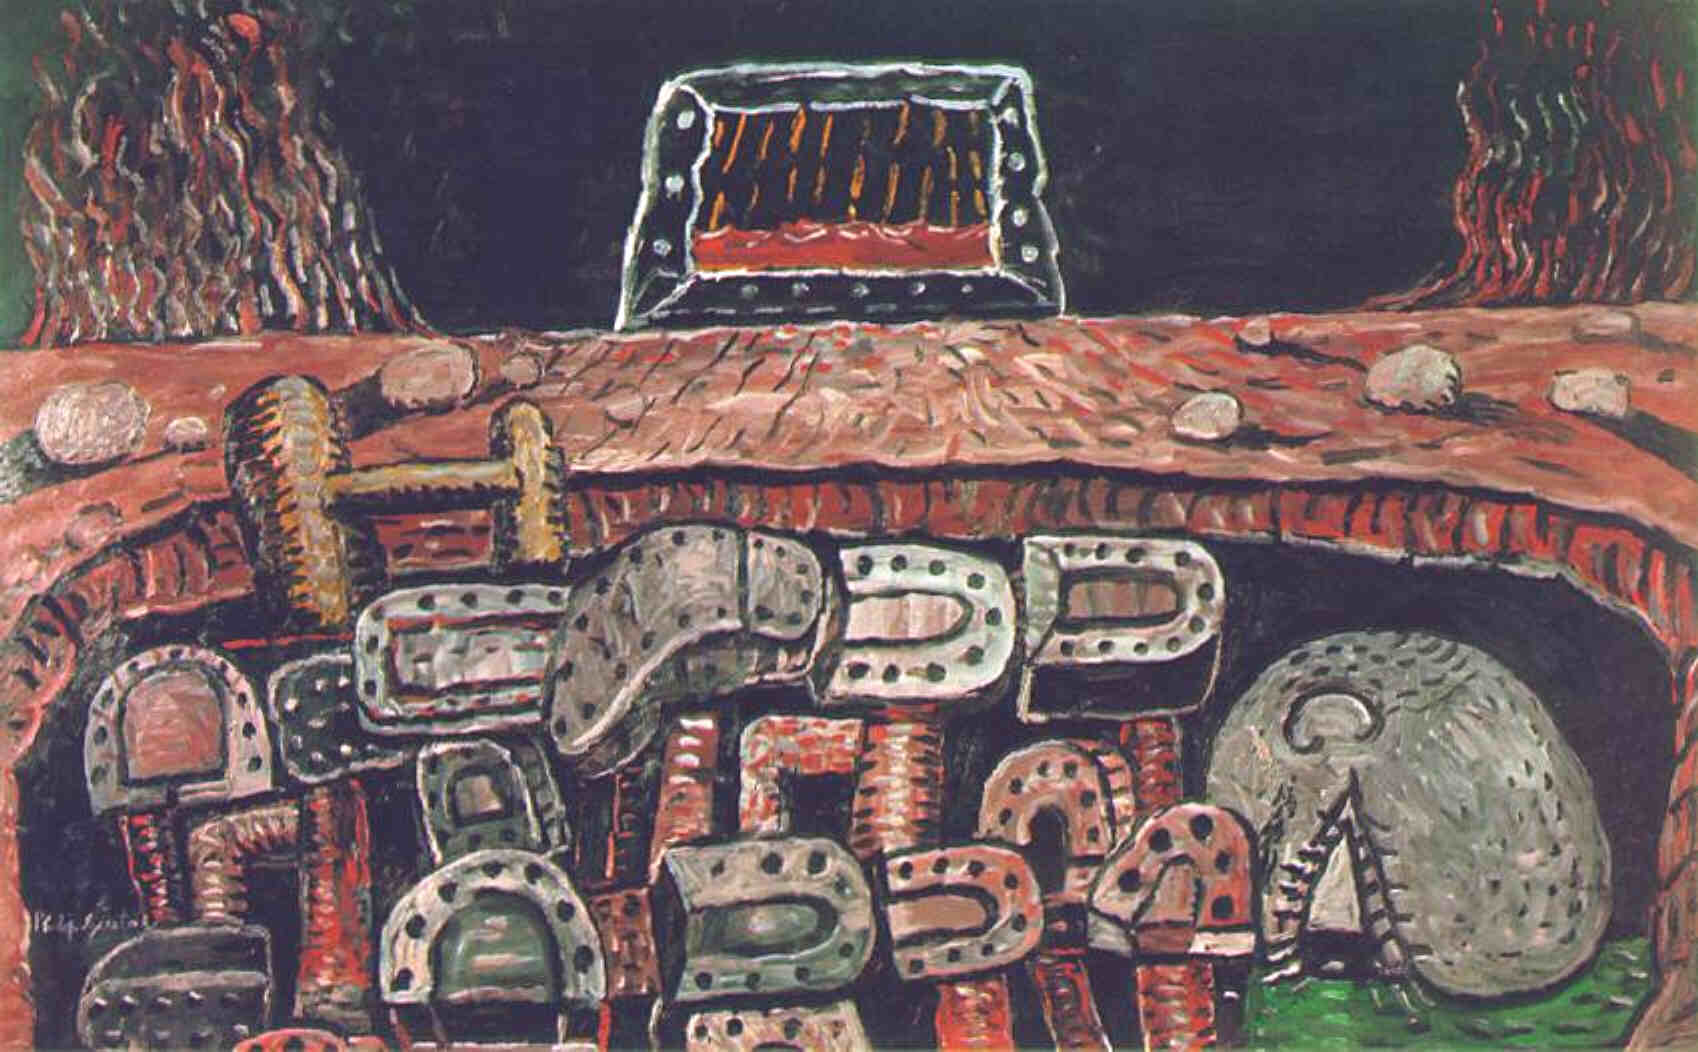 Philip Guston, The Pit, 1976. Courtesy McKee Gallery, New York © The Estate of Philip Guston